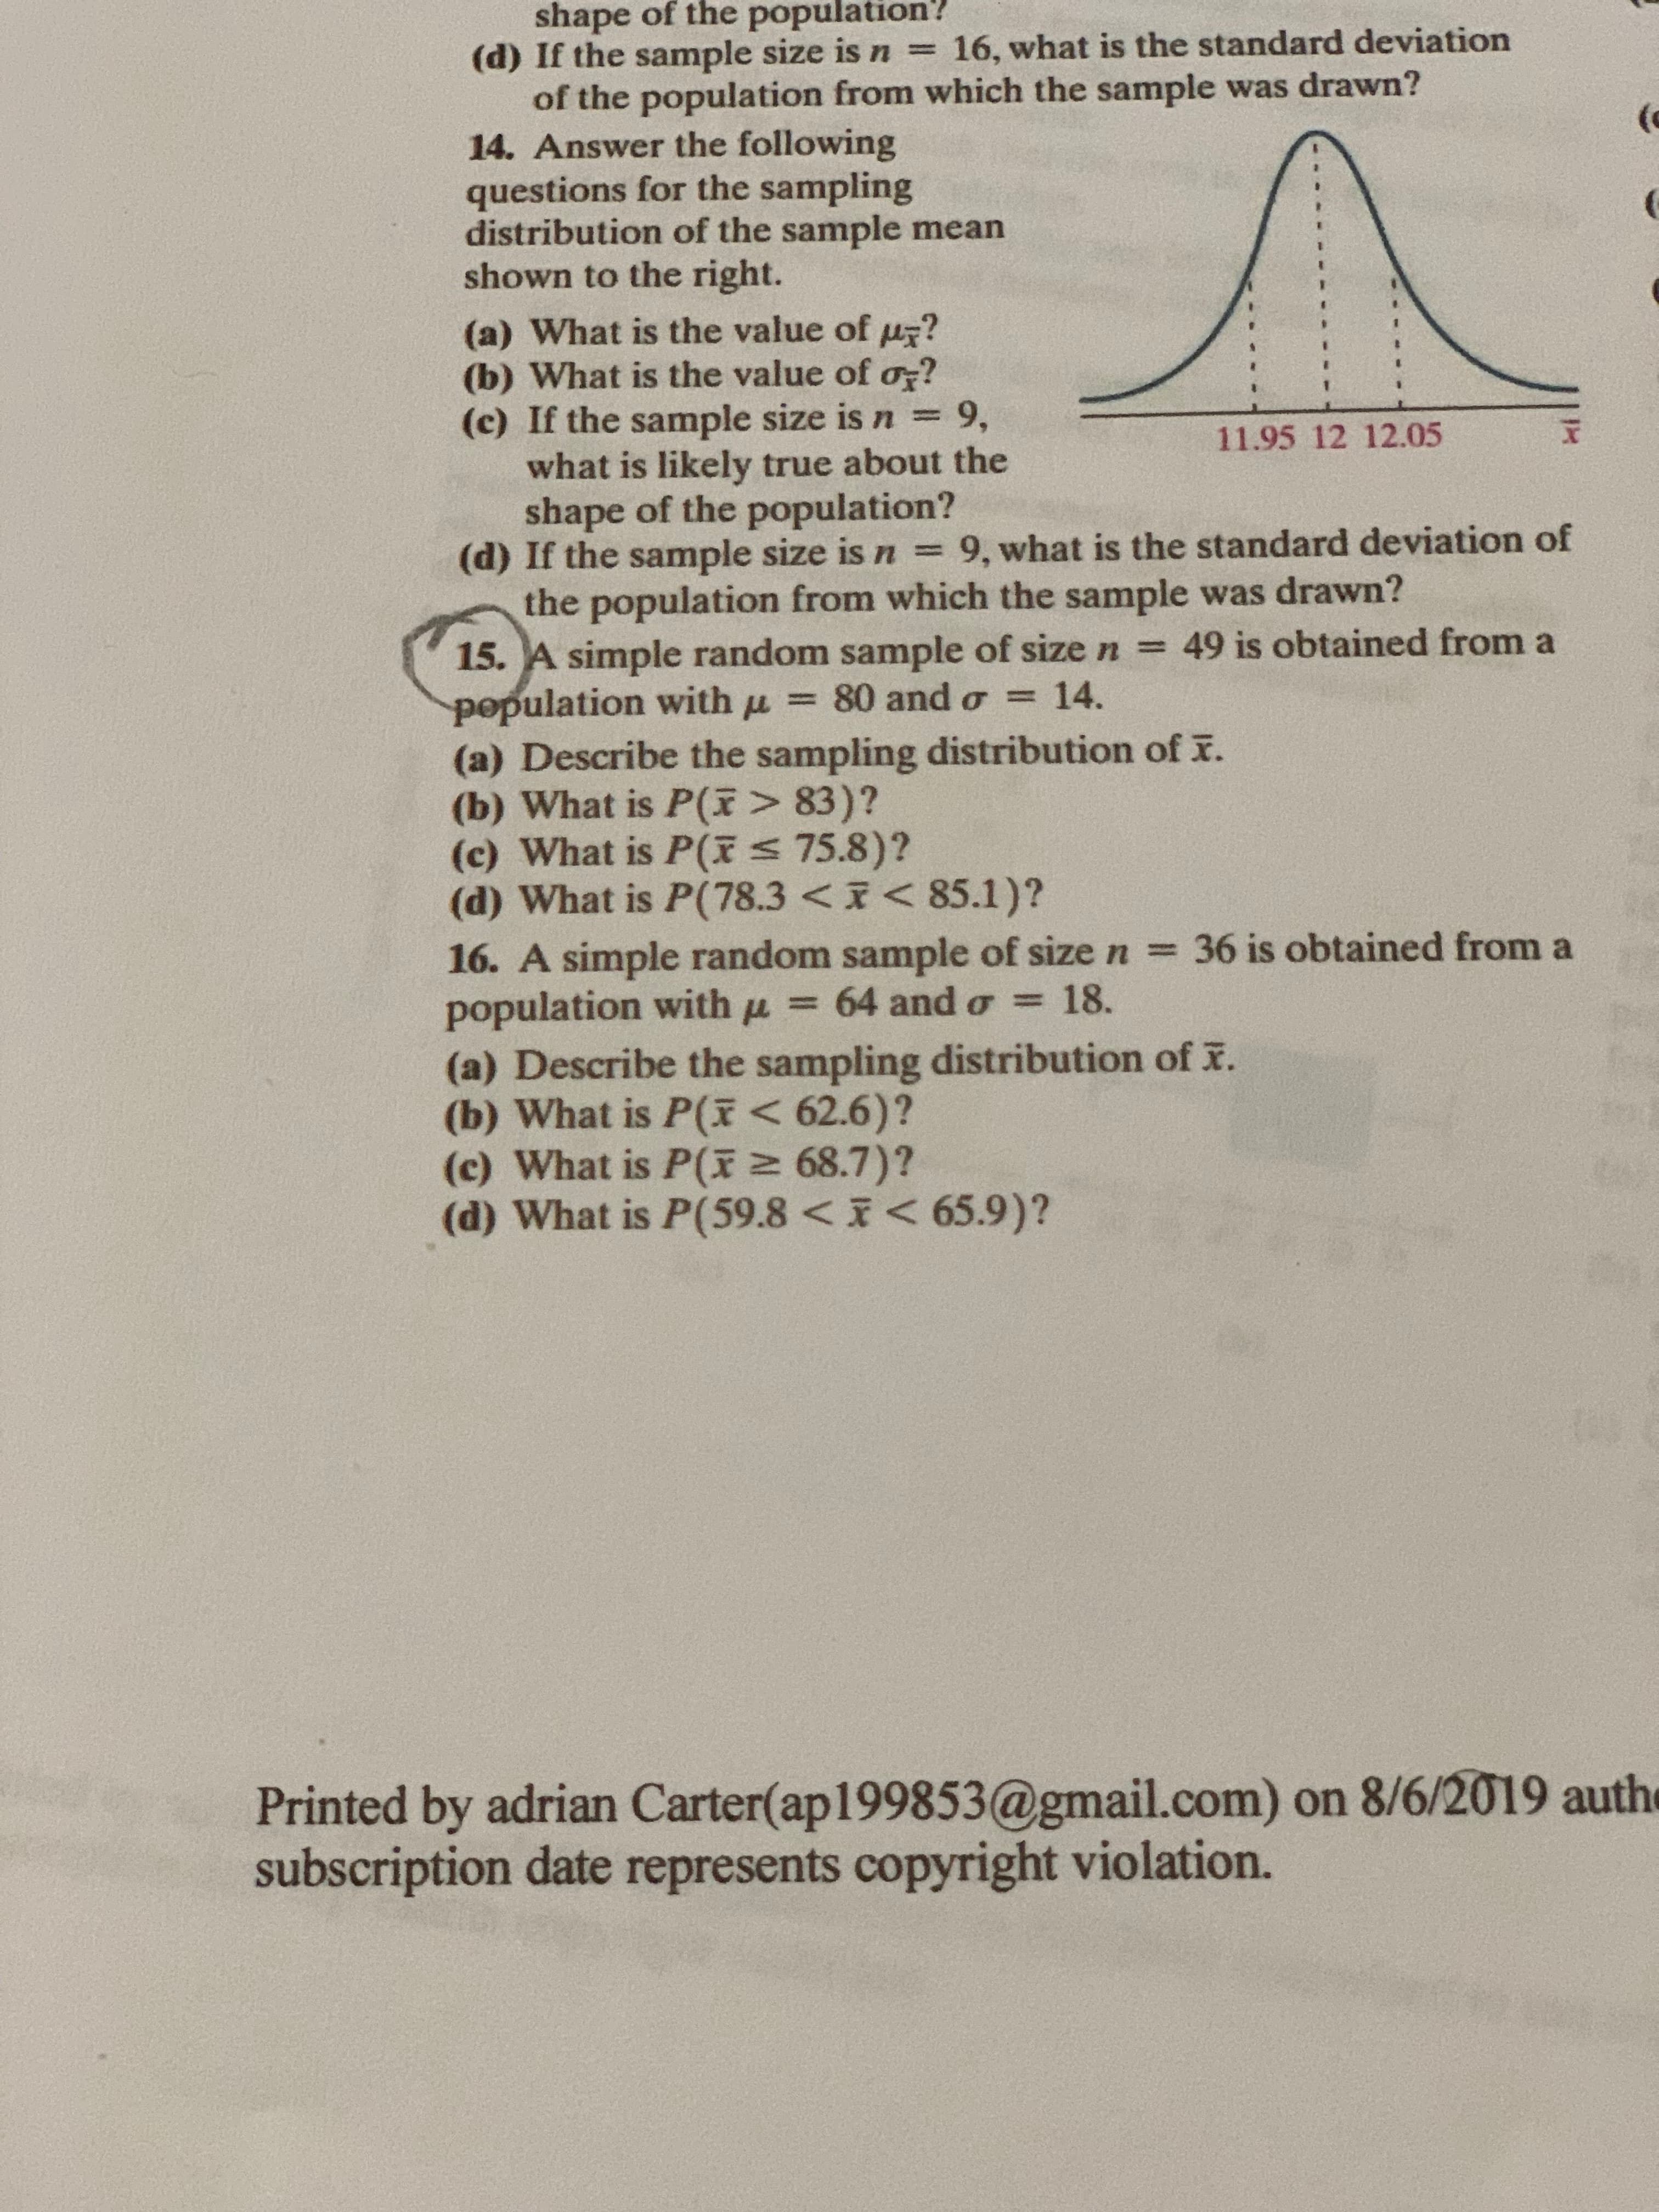 shape of the population?
16, what is the standard deviation
(d) If the sample size is n =
of the population from which the sample was drawn?
14. Answer the following
questions for the sampling
distribution of the sample mean
shown to the right.
(
(
(a) What is the value of u?
(b) What is the value of o?
(c) If the sample size is n 9,
what is likely true about the
shape of the population?
(d) If the sample size is n = 9, what is the standard deviation of
the population from which the sample was drawn?
15. A simple random sample of size n =
population with u=
(a) Describe the sampling distribution of r.
(b) What is P(F> 83)?
(c) What is P(F 75.8)?
(d) What is P(78.3 < < 85.1)?
16. A simple random sample of size n 36 is obtained from a
population with u = 64 and o = 18.
(a) Describe the sampling distribution of F.
(b) What is P(I < 62.6)?
(c) What is P(F2 68.7)?
(d) What is P(59.8 < < 65.9)?
11.95 12 12.05
49 is obtained from a
14.
80 and o
Printed by adrian Carter(ap199853@gmail.com) on 8/6/2019 authe
subscription date represents copyright violation.
